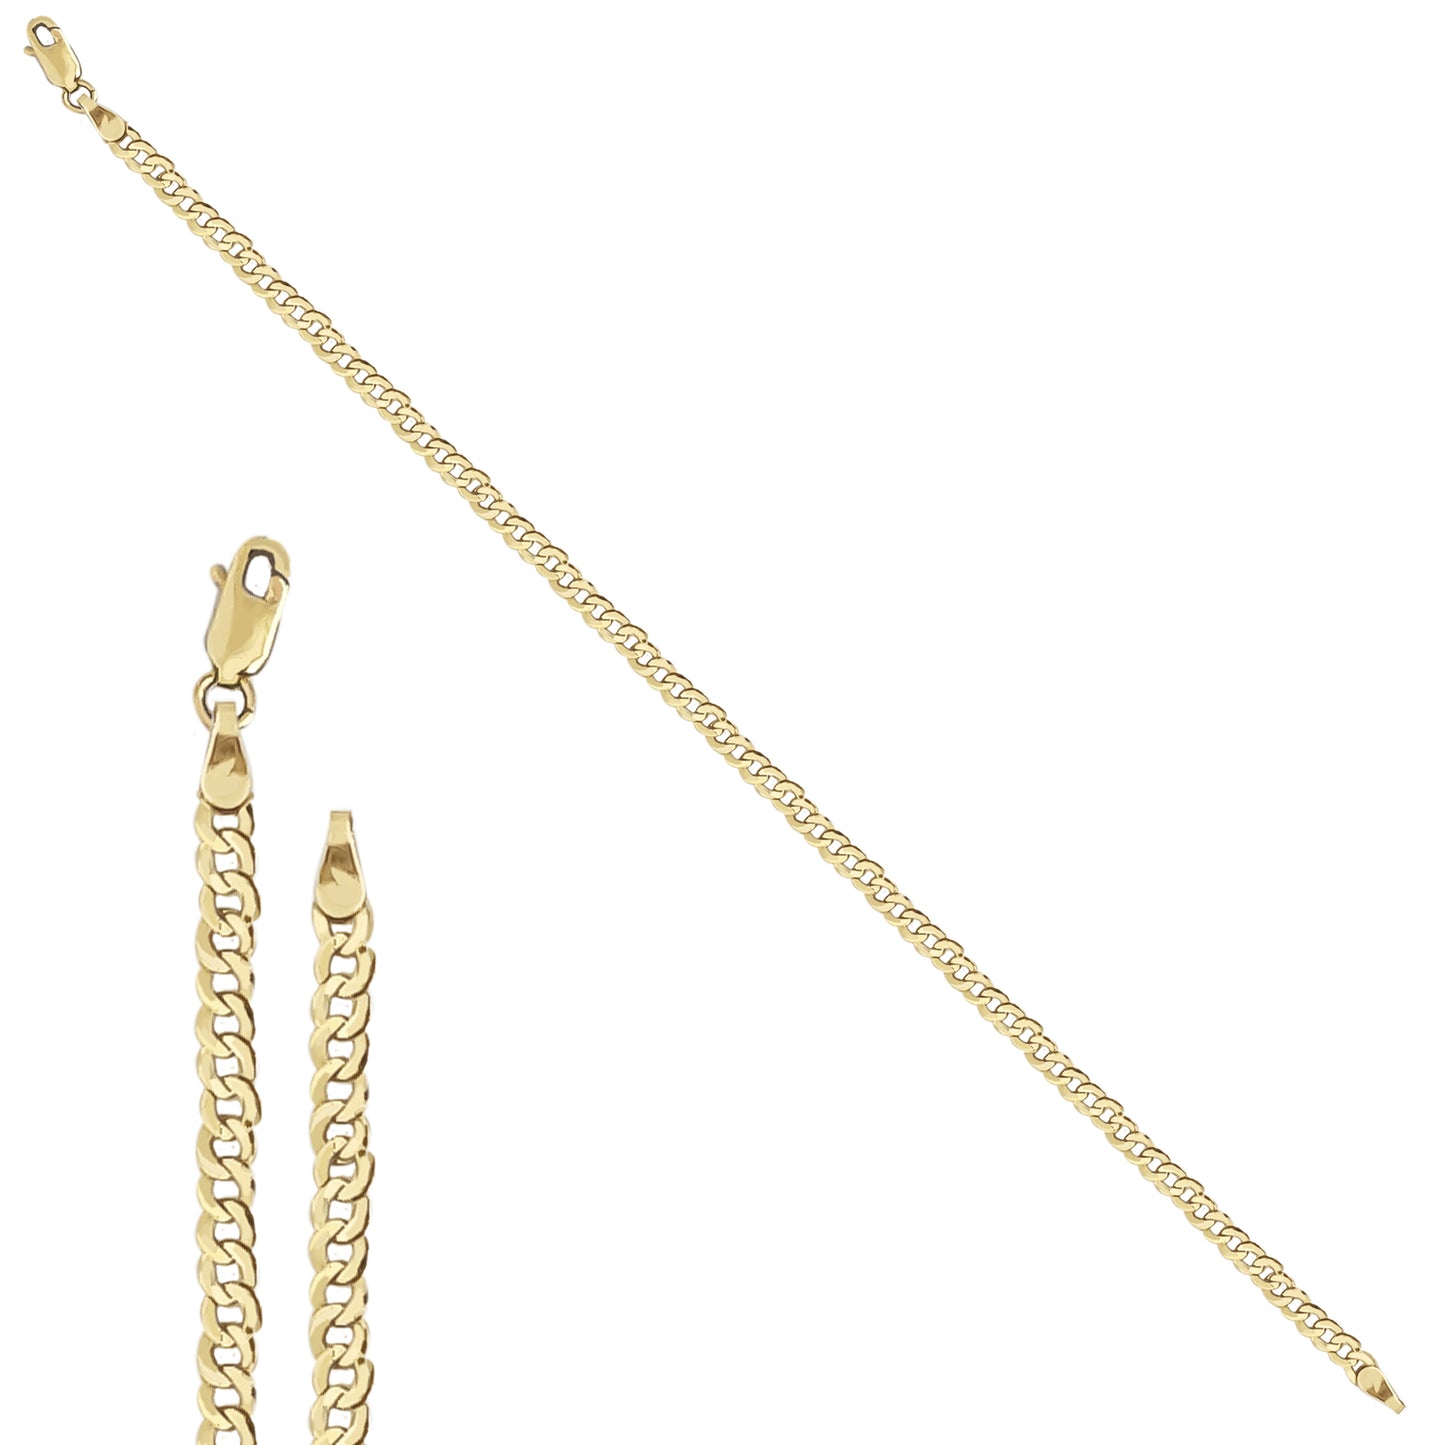 Light Curb Link Gents Bracelet in 9ct Yellow Gold